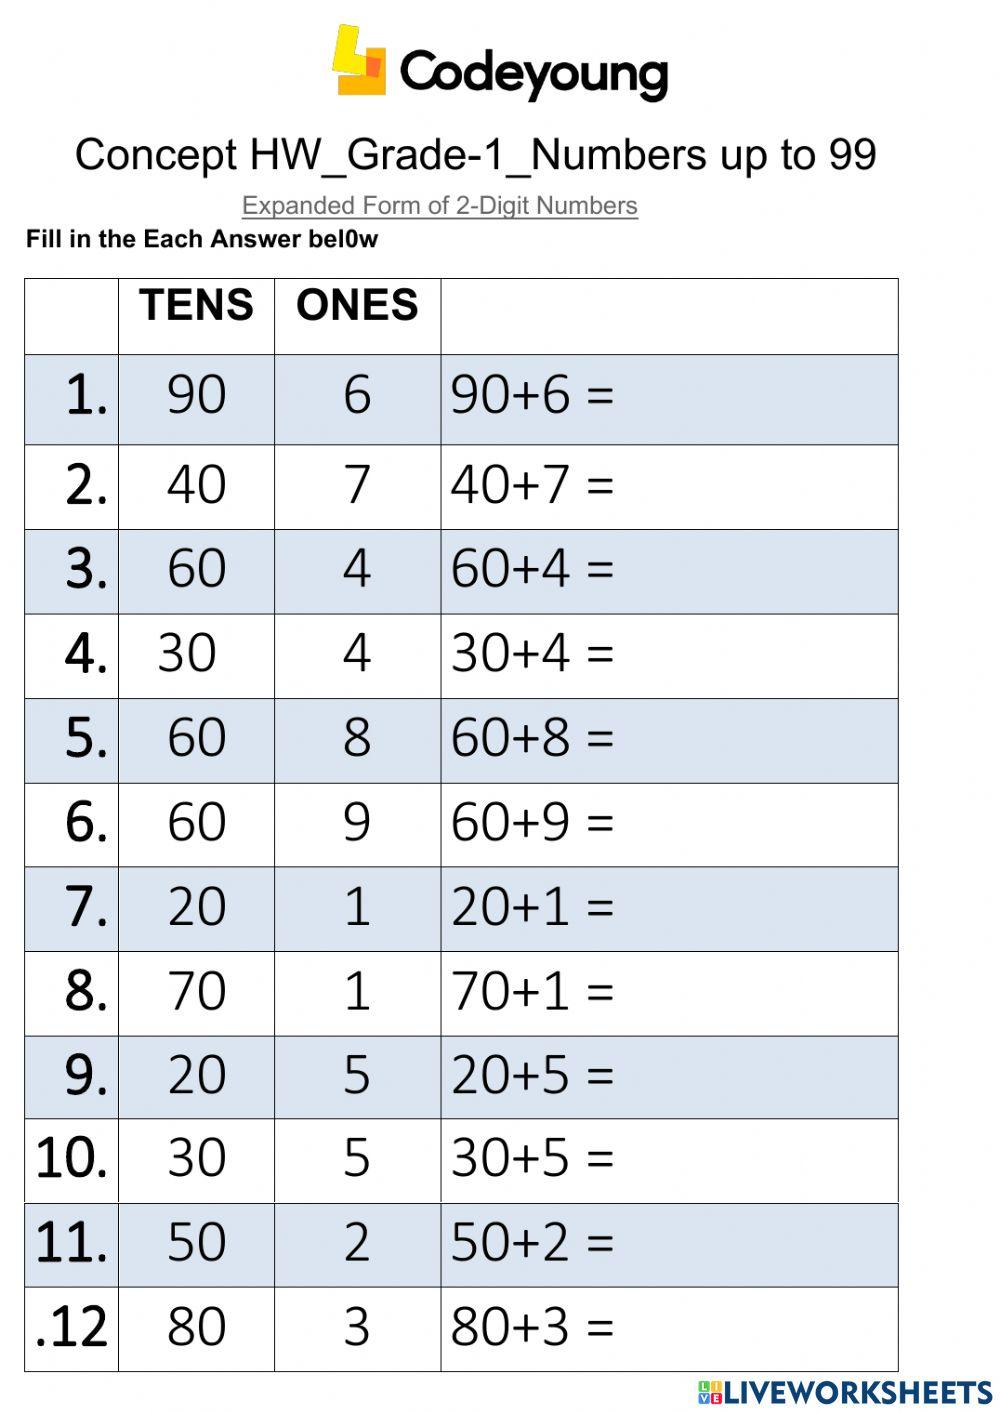 Expanded Form of 2-Digit Numbers-Concept HW